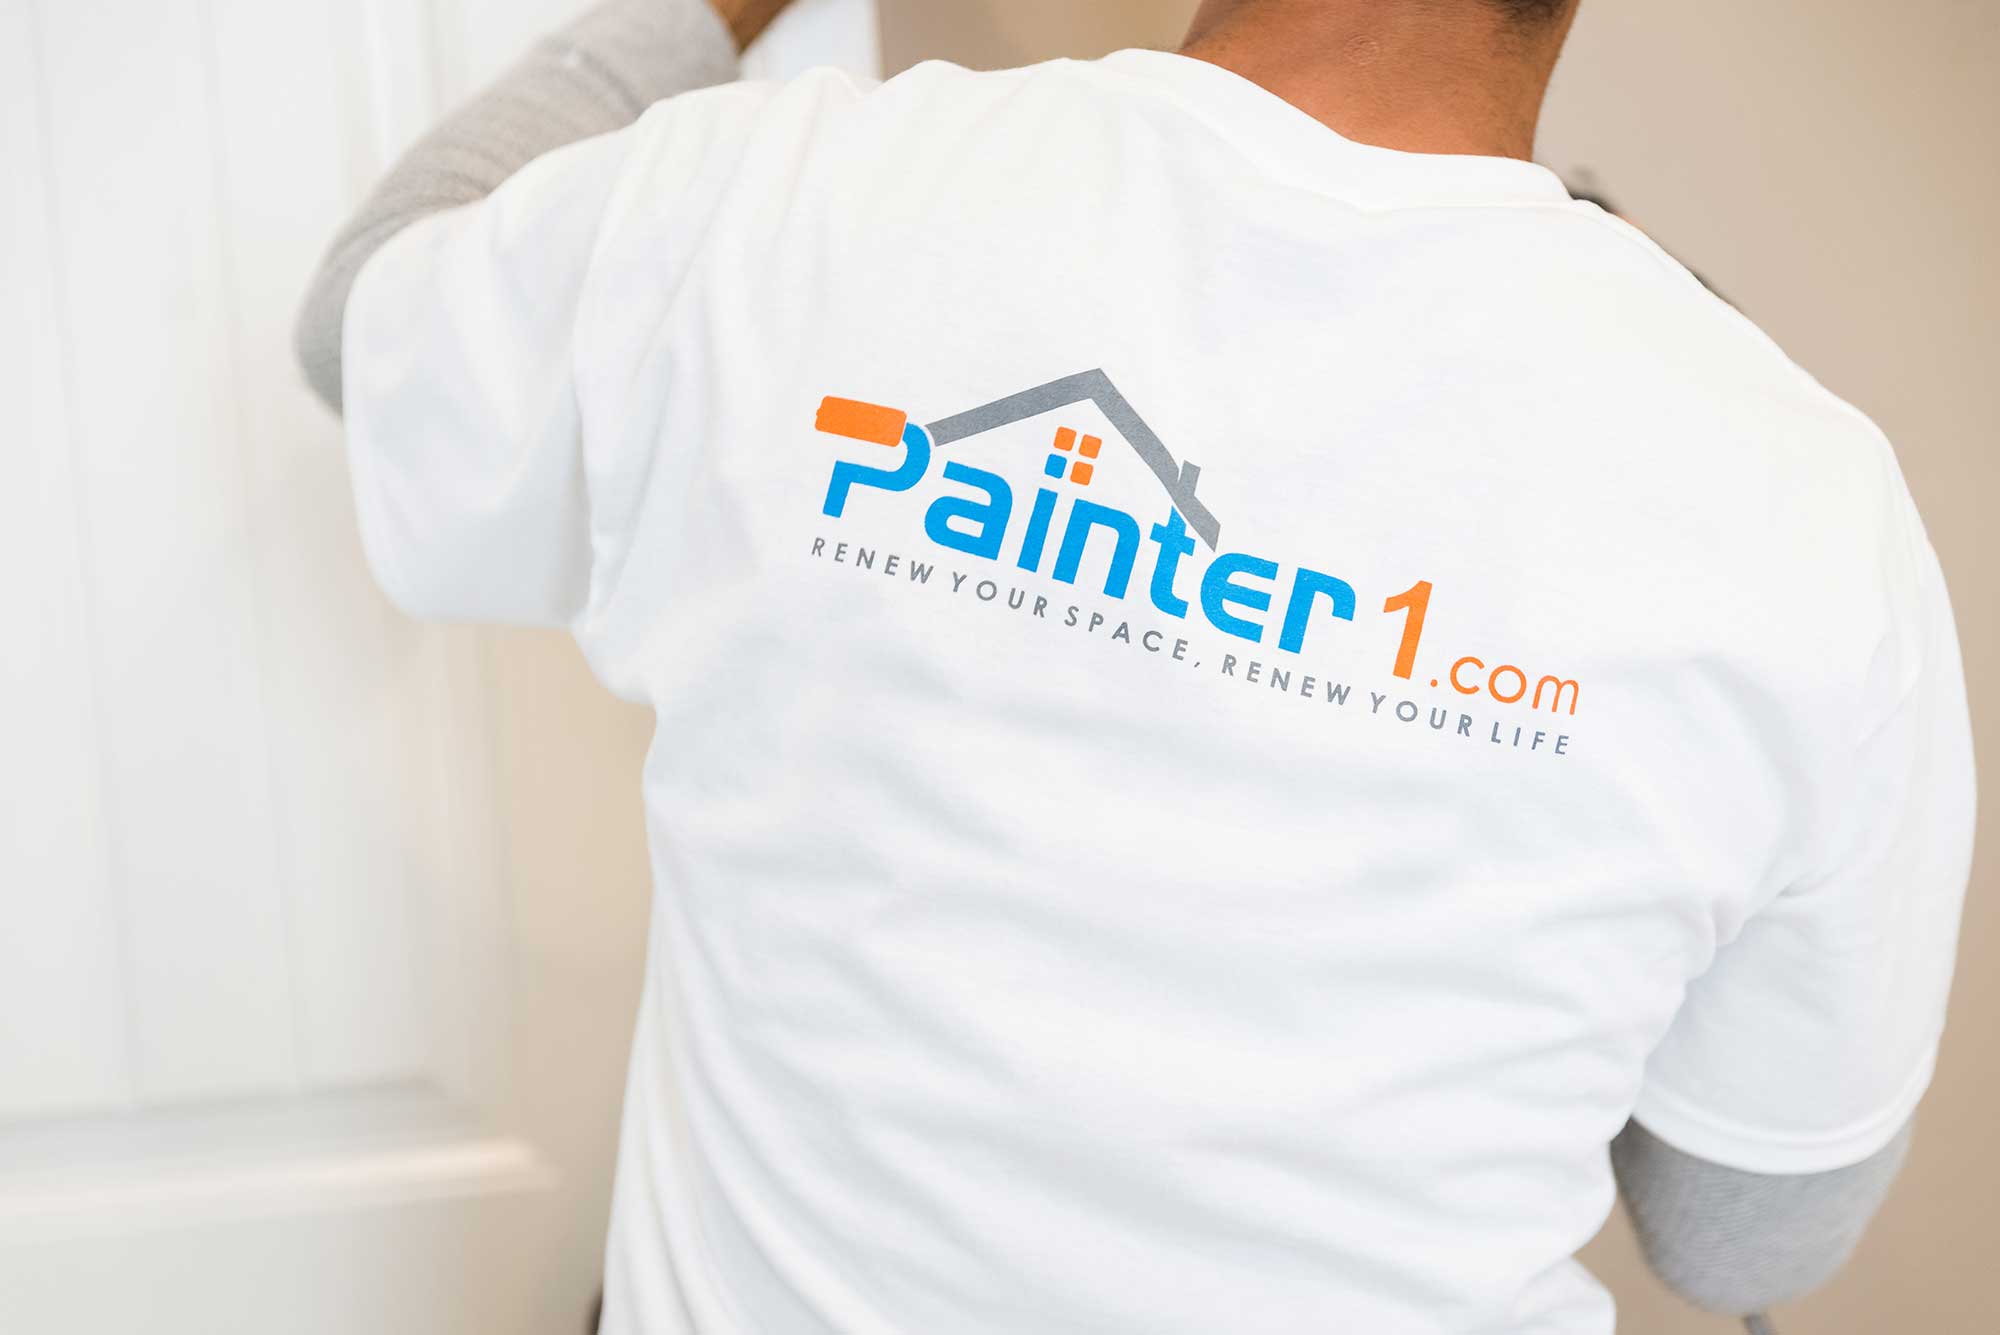 If you are searching for wallpaper removal in Marietta, Painter1 offers professional wallpaper removal in Marietta.